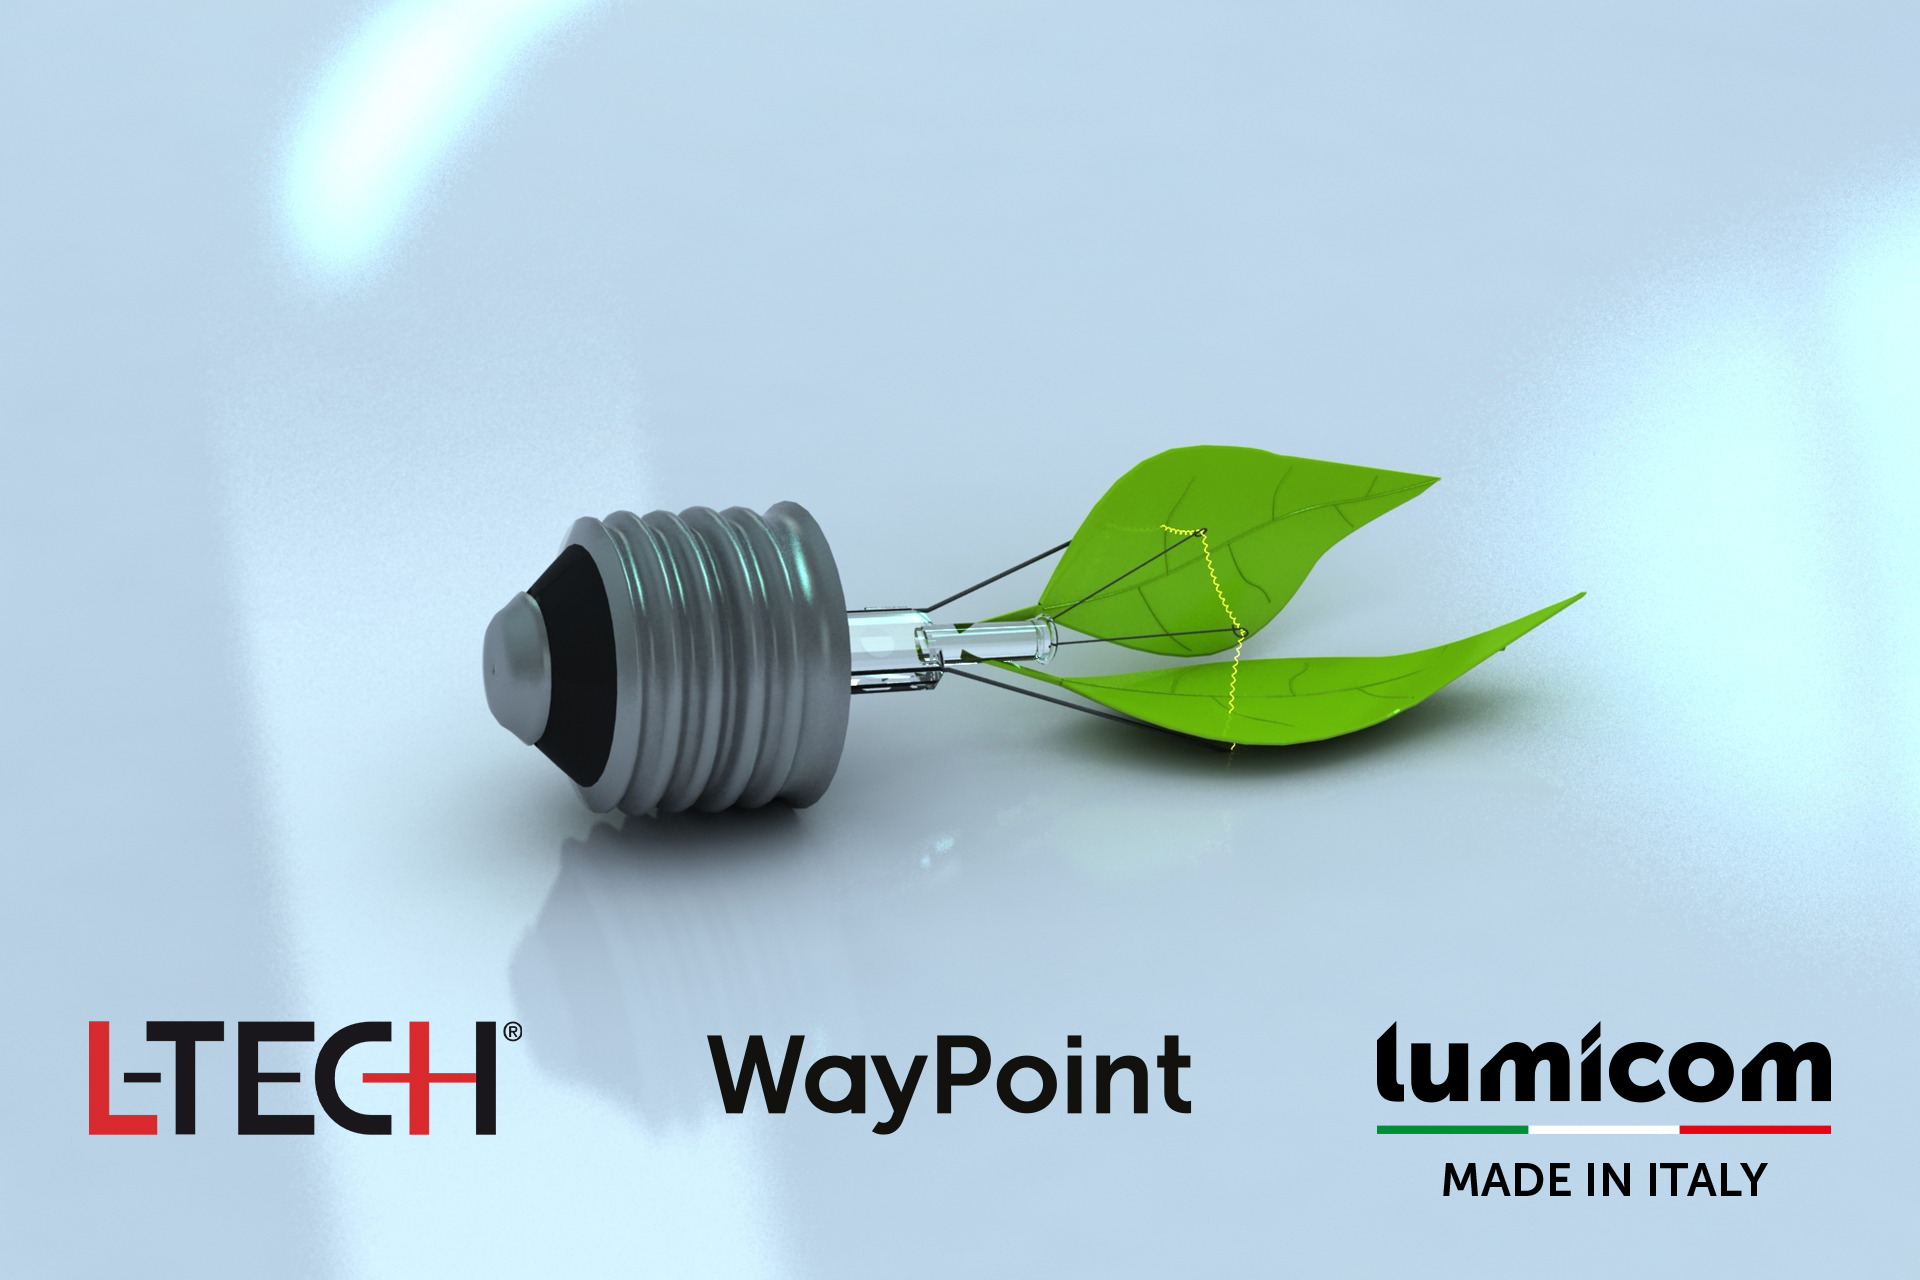 FROM 1 SEPTEMBER 2021 THE NEW EU DIRECTIVE ON ECODESIGN COMES INTO FORCE. WAYPOINT IS ALREADY READY FOR A LONG TIME.